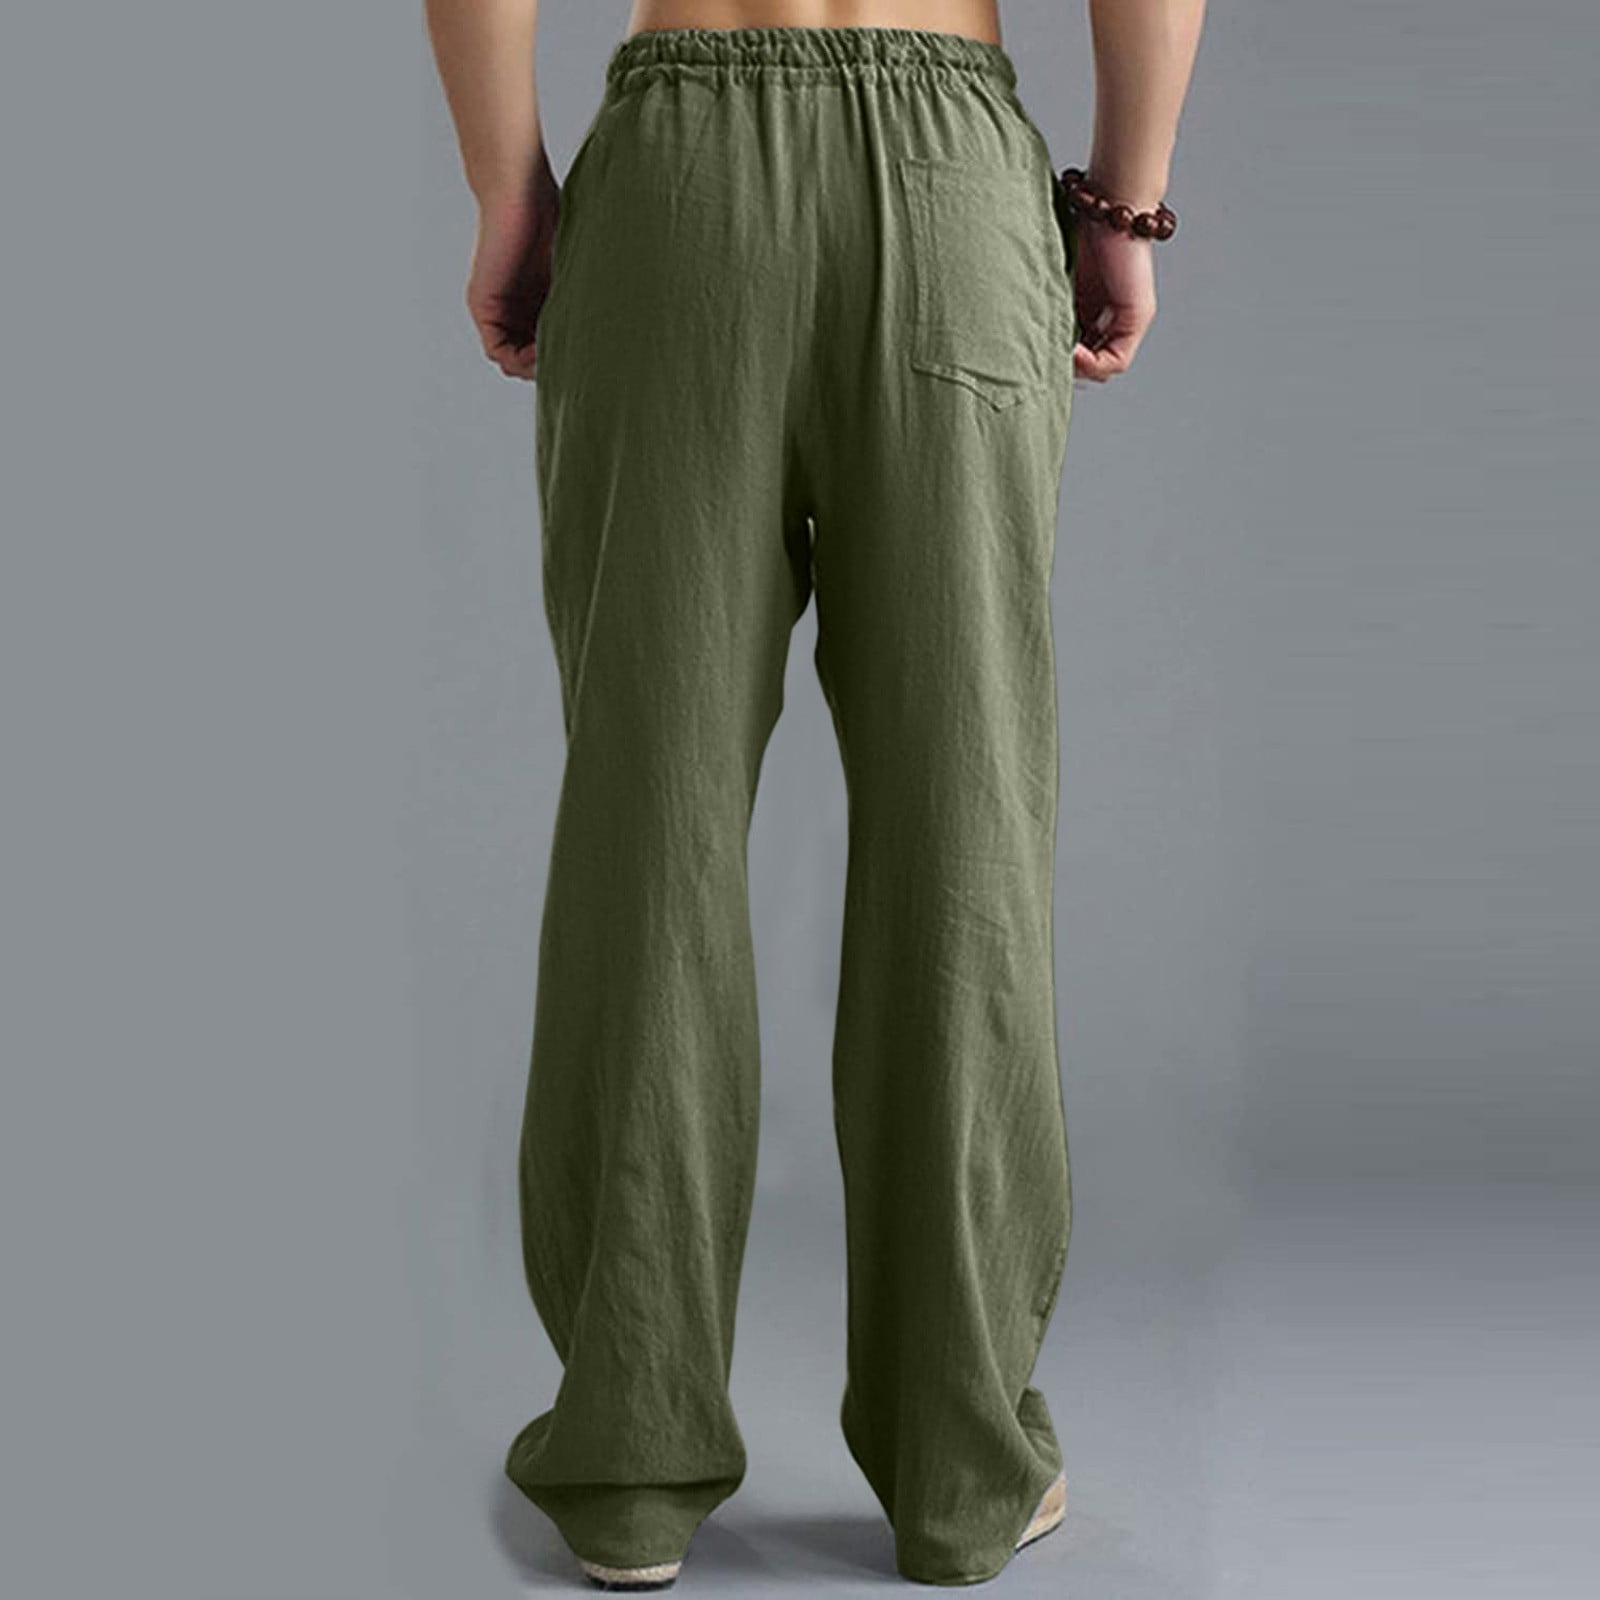  LIUPMWE Mens Casual Joggers Pants with Pockets Cotton